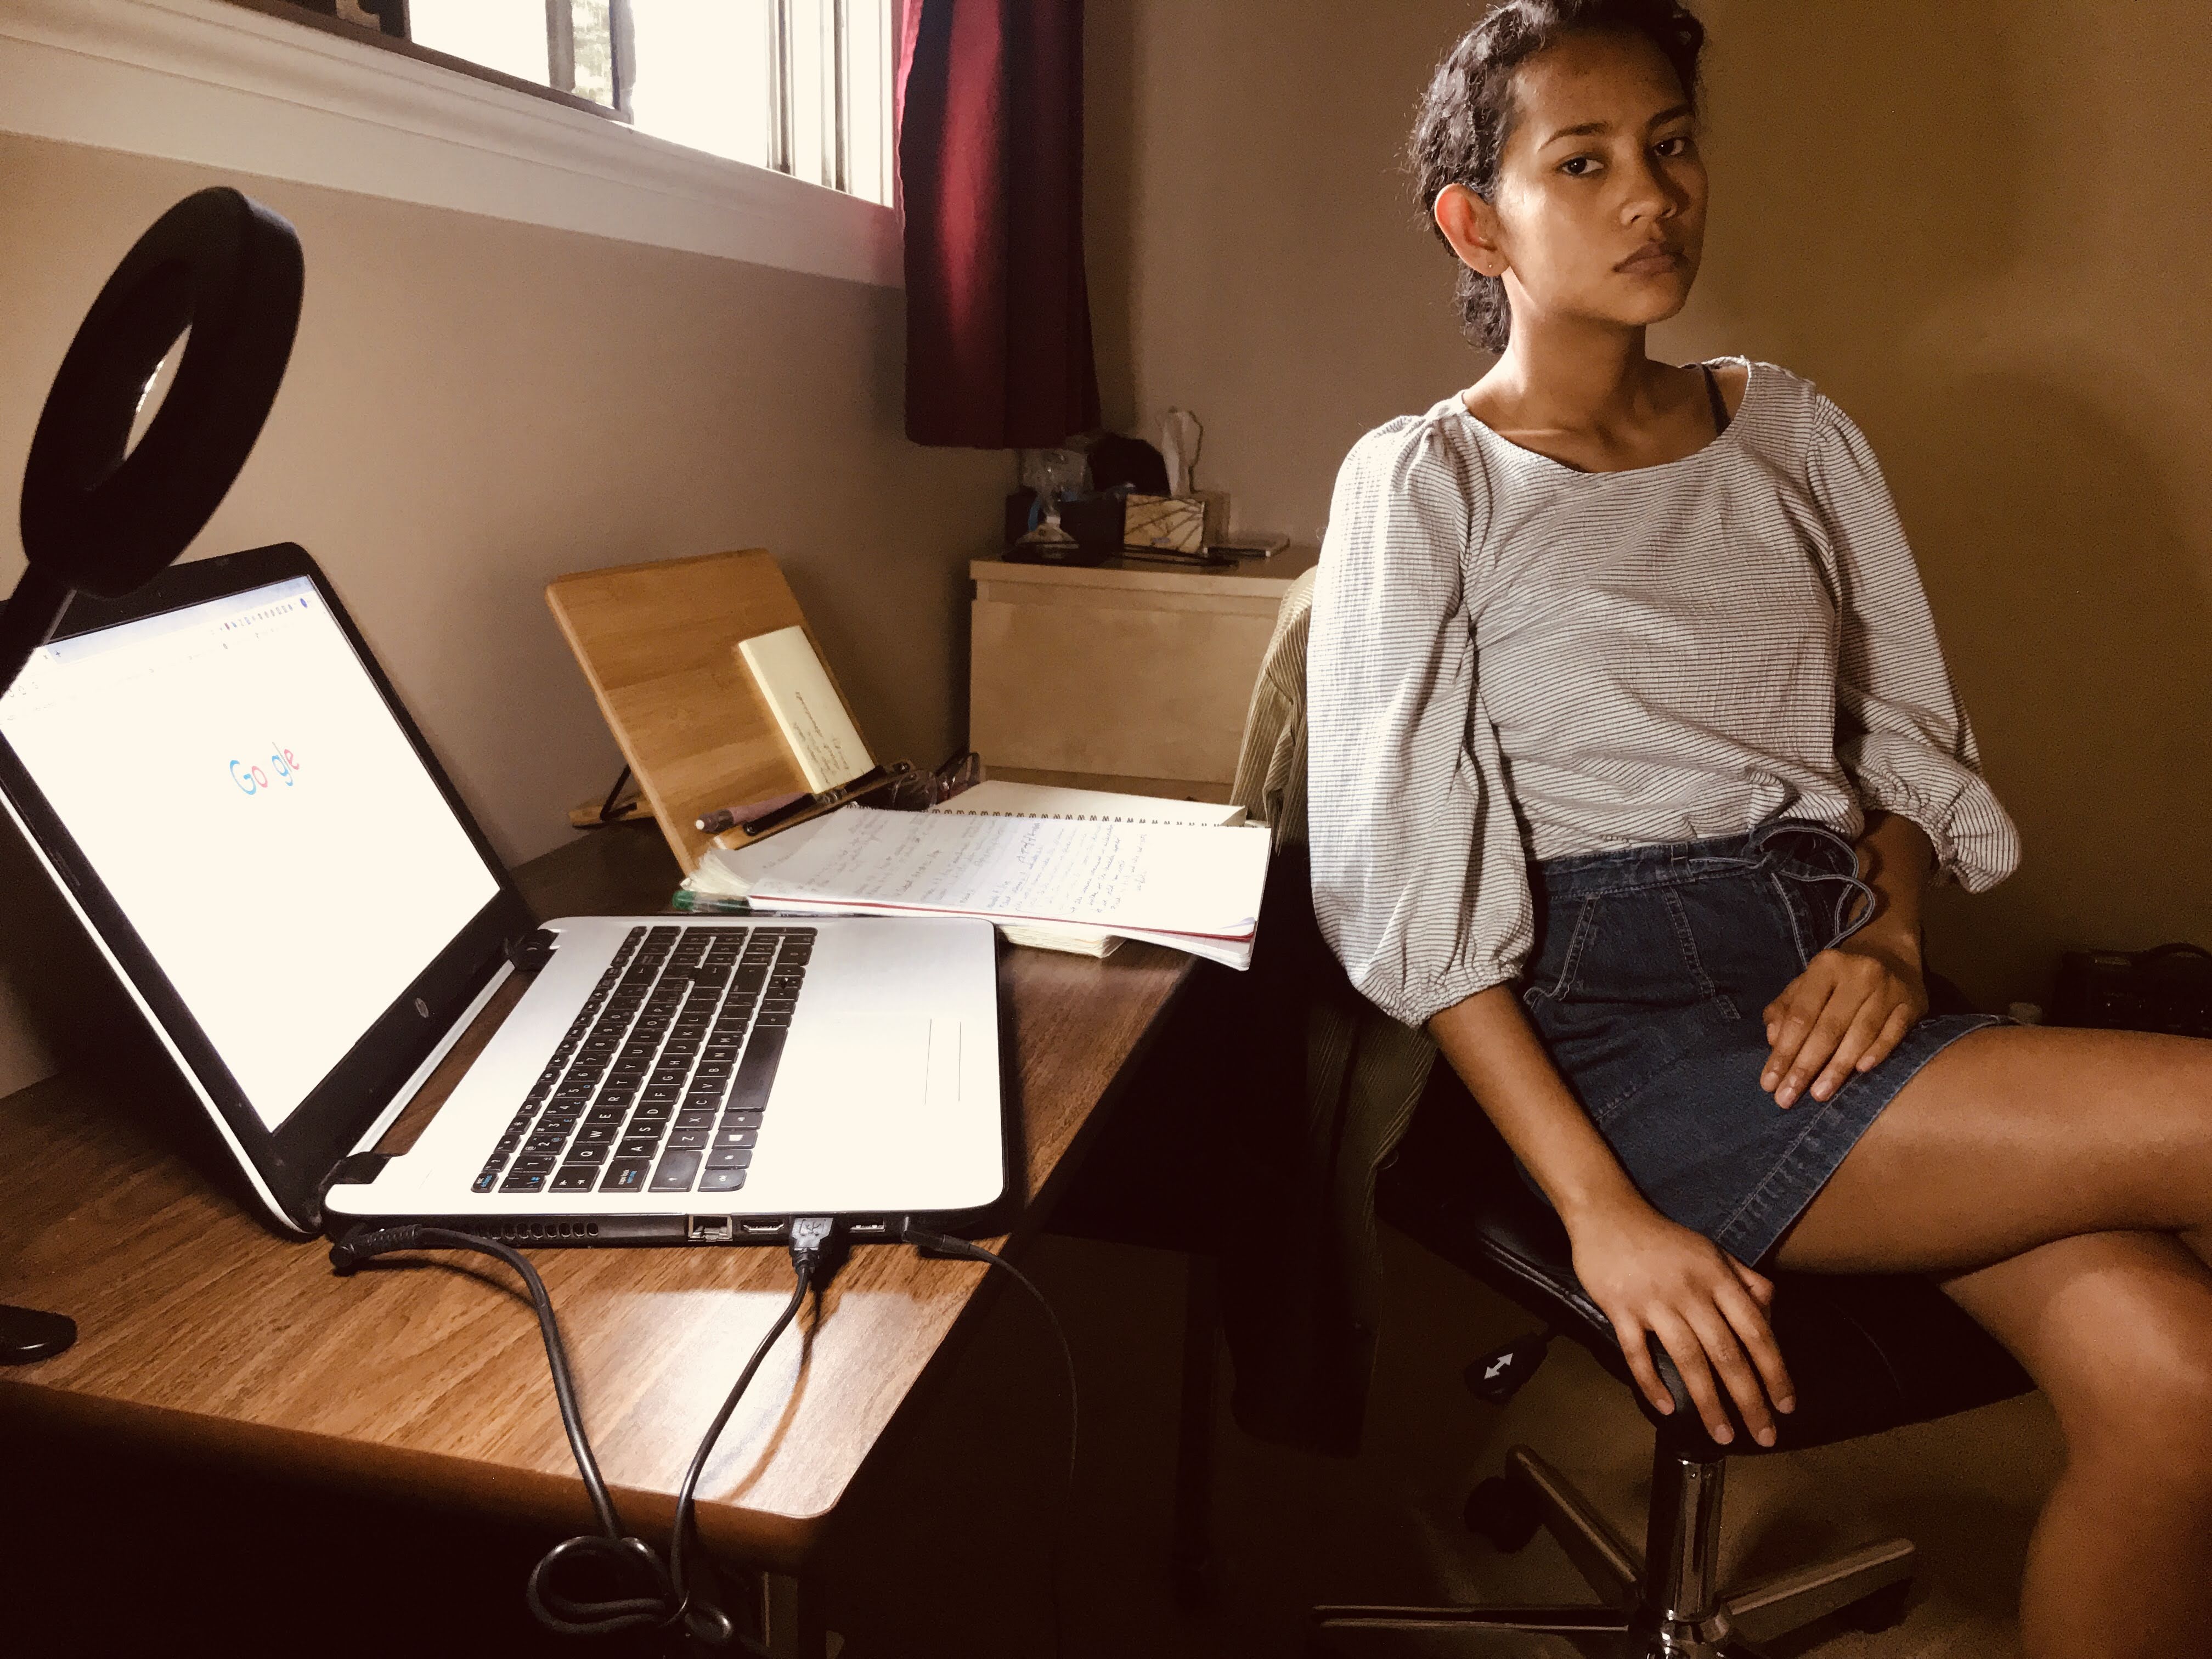 A photograph of a somber young woman in her room. She is at her desk and facing the camera. Her open laptop displays the Google homepage.